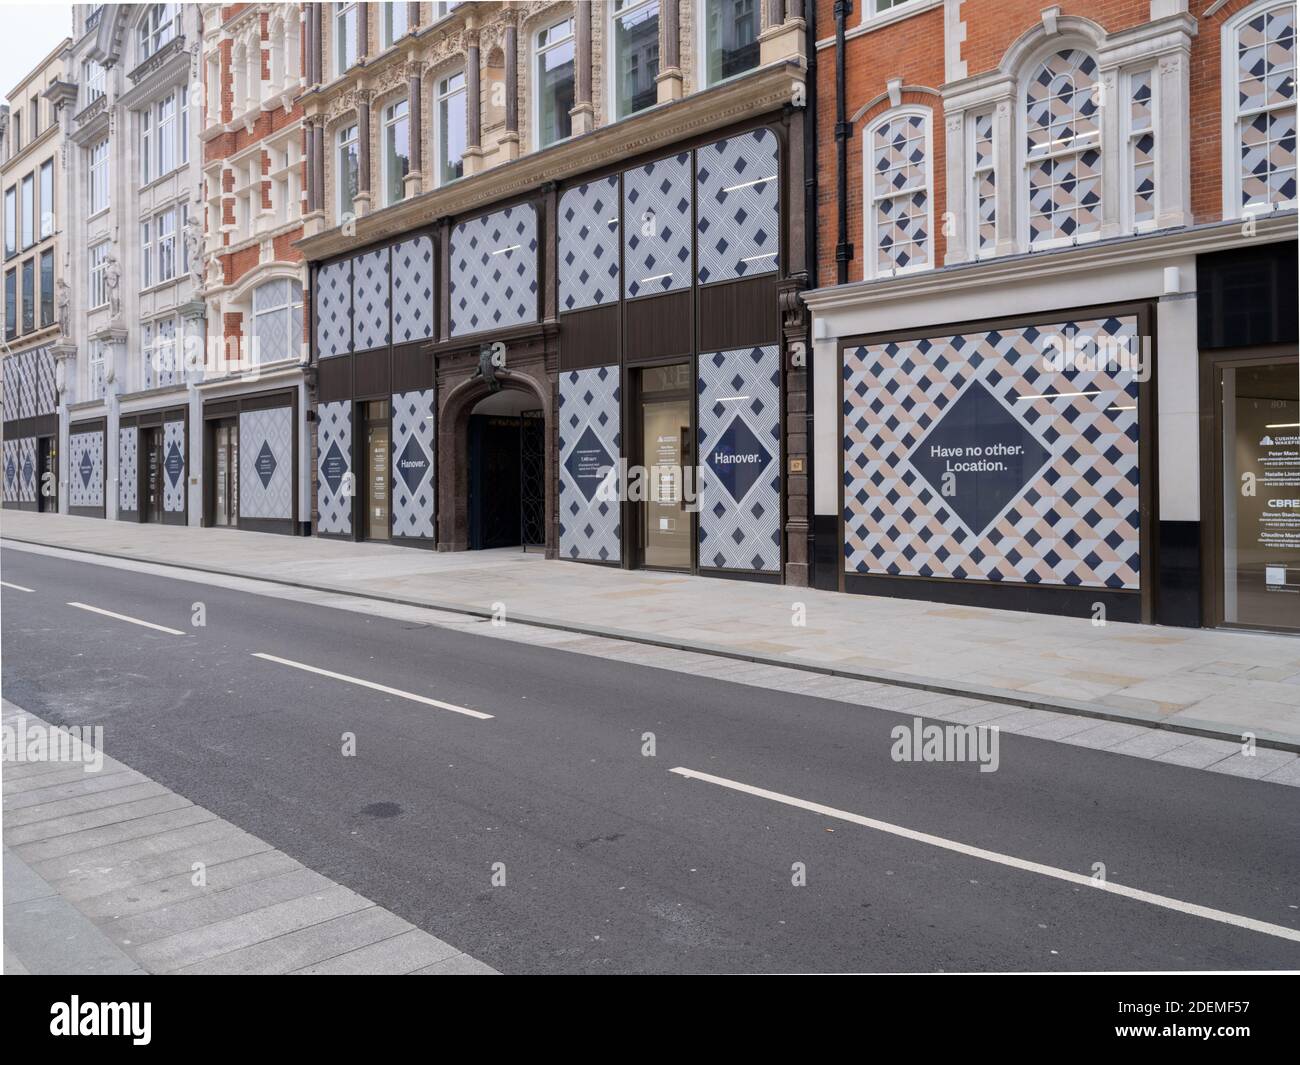 GREAT BRITAIN / England / London / Several storefronts, remain vacant in New Bond Street. Stock Photo